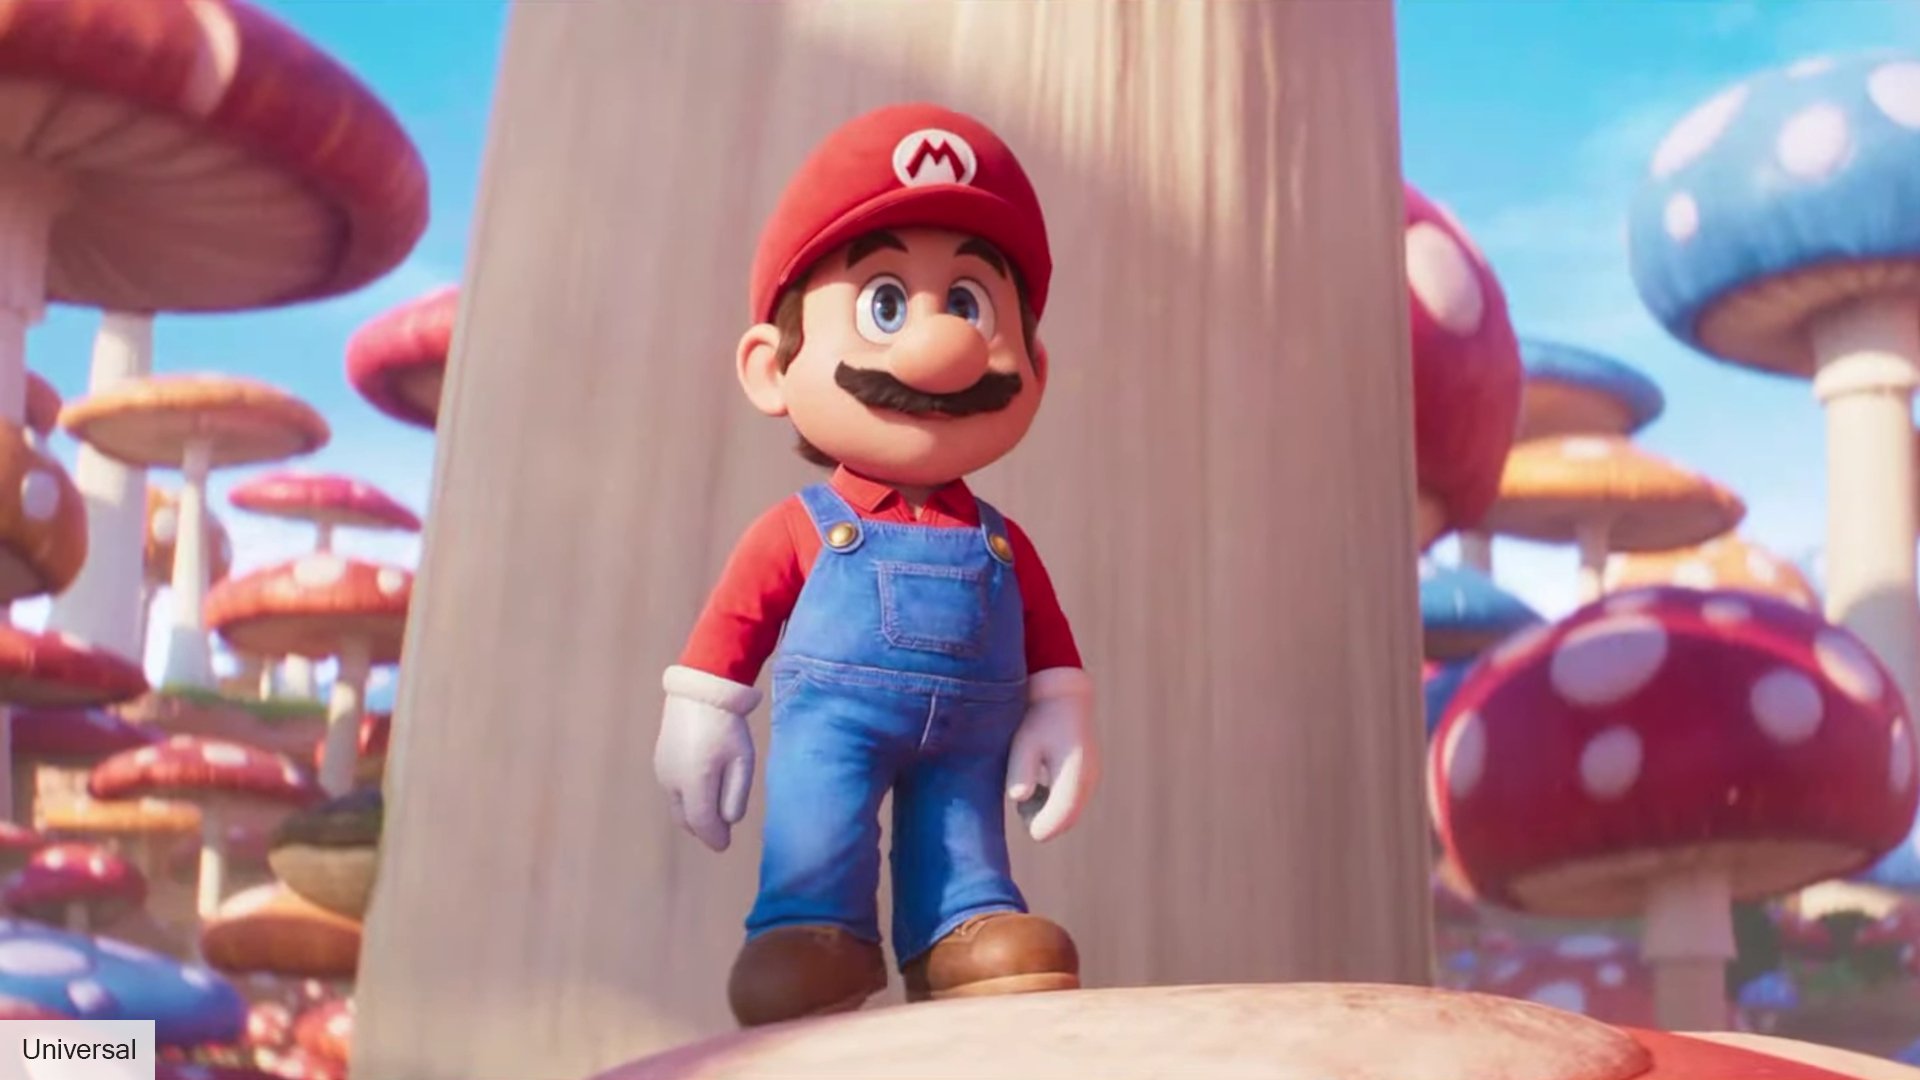 Wahoo, the new Super Mario Bros movie trailer is here. The Digital Fix